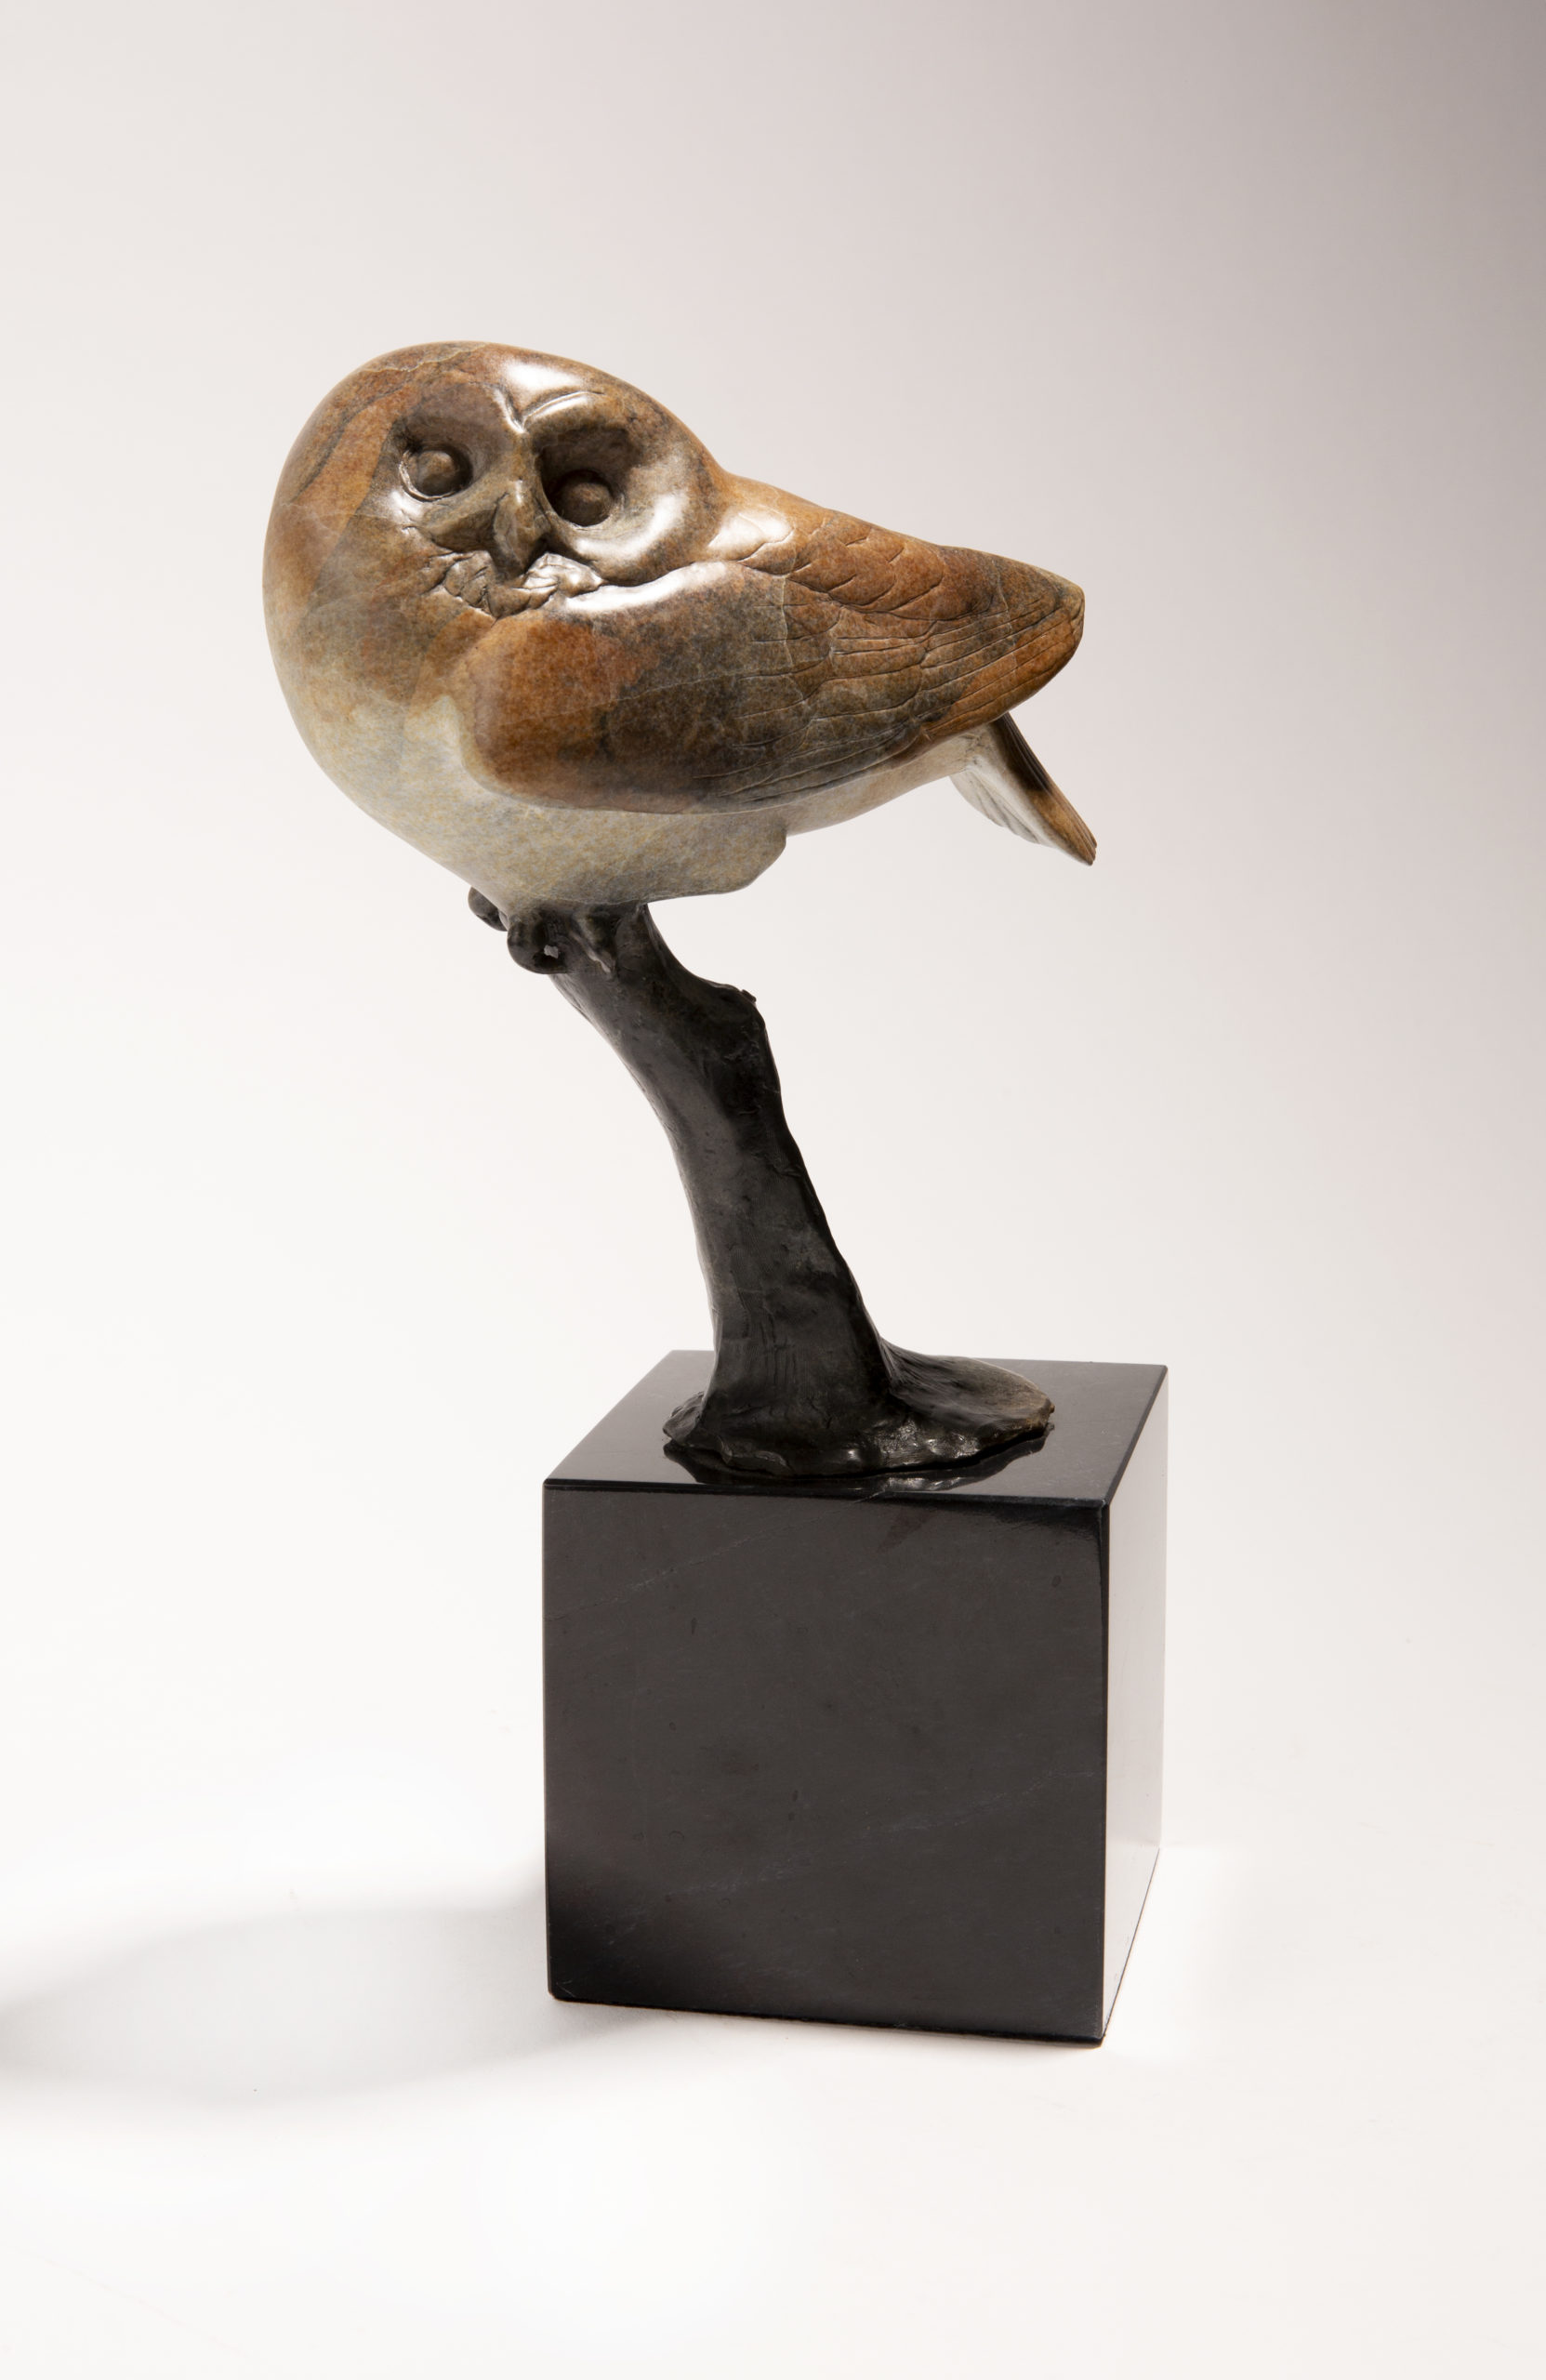 
							

									Tony Angell									Saw Whet Owl 									bronze, 12 x 5 1/2 x 5 1/2 inches (with base), edition of 6									


							